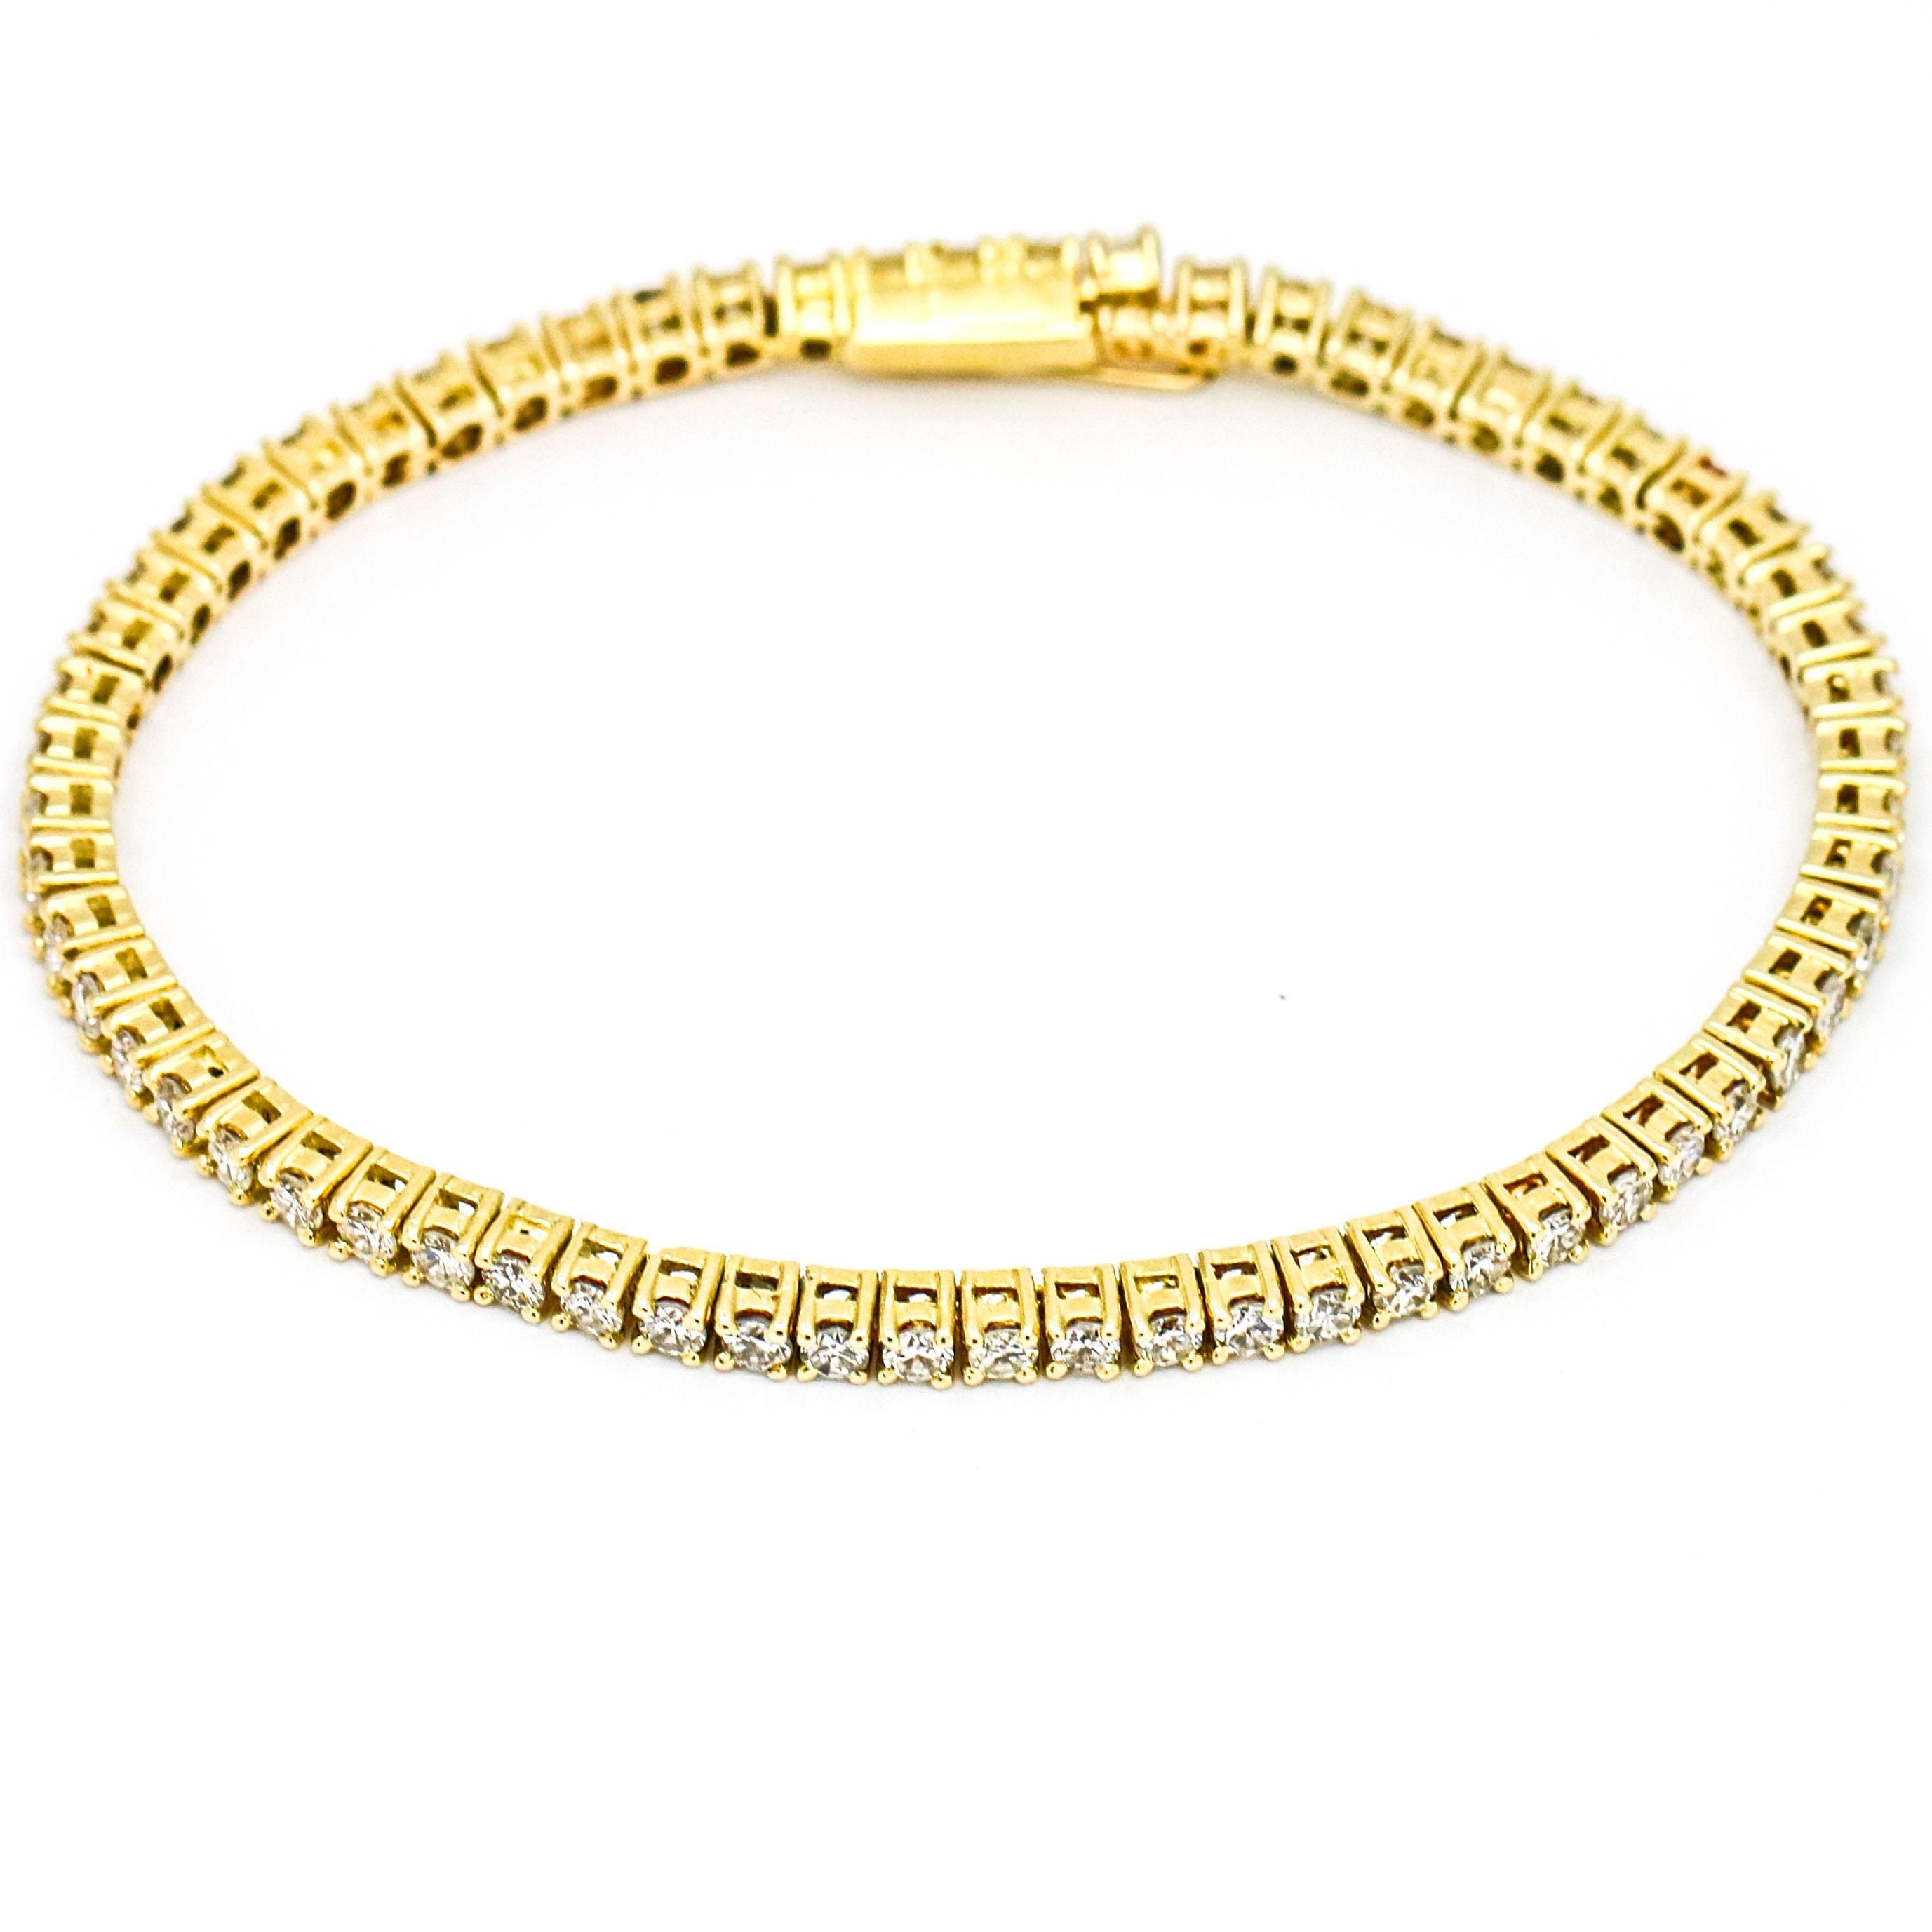 Diamond tennis bracelet crafted in 14-karat yellow gold. Slide clasp with safety.

Size, Medium
Length, 7 inches
Width, 2.5mm
Weight, 11.3 grams
Total carat weight, 3.00 carats

Previously owned, in excellent condition. Cleaned and polished. It